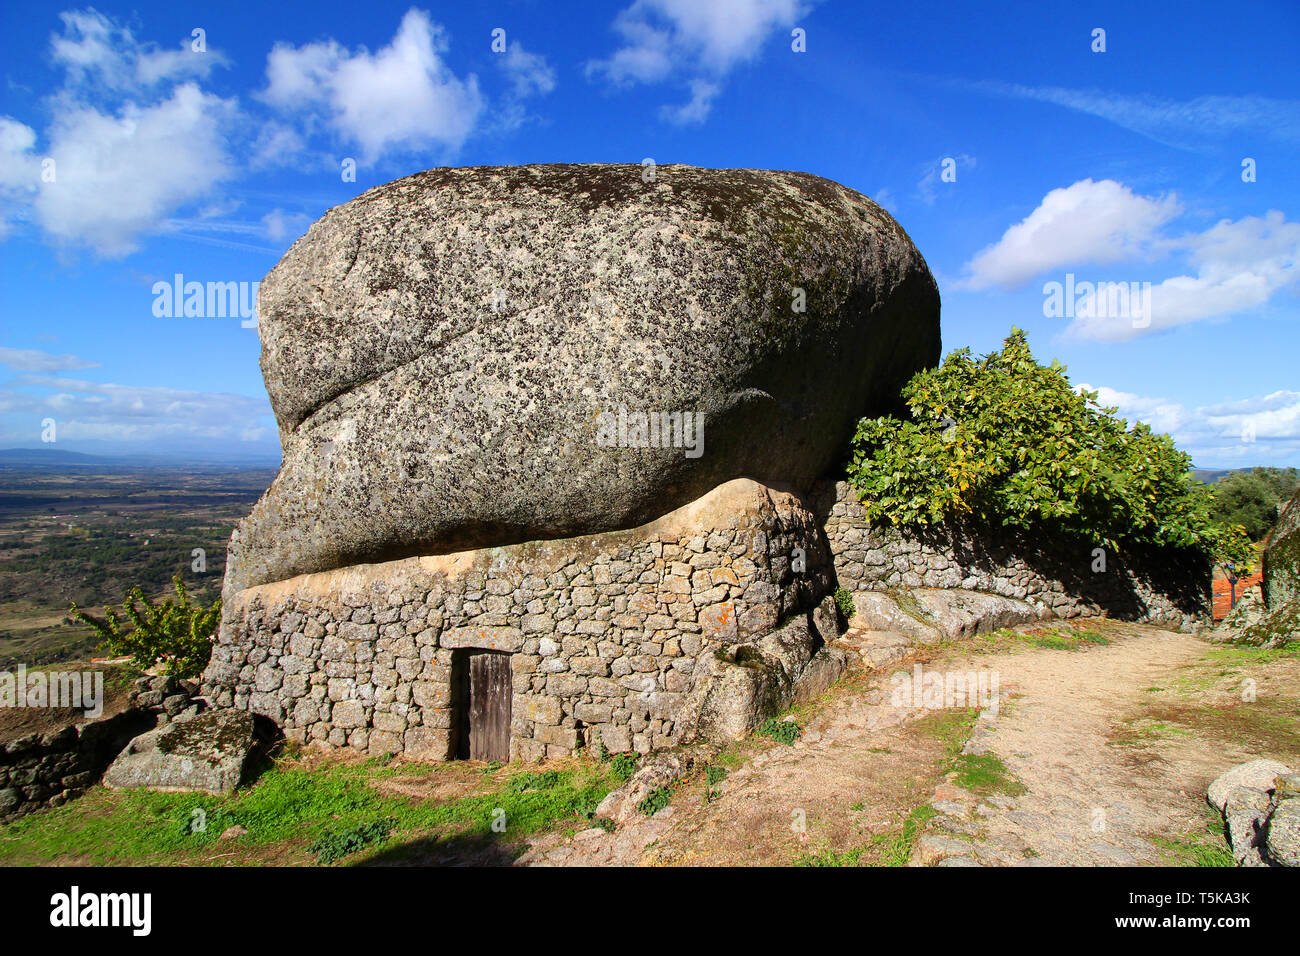 House buillt in it's natural boulder, rocky environment in one of the 12 historical villages in Portugal, Monsanto high on the hill Stock Photo